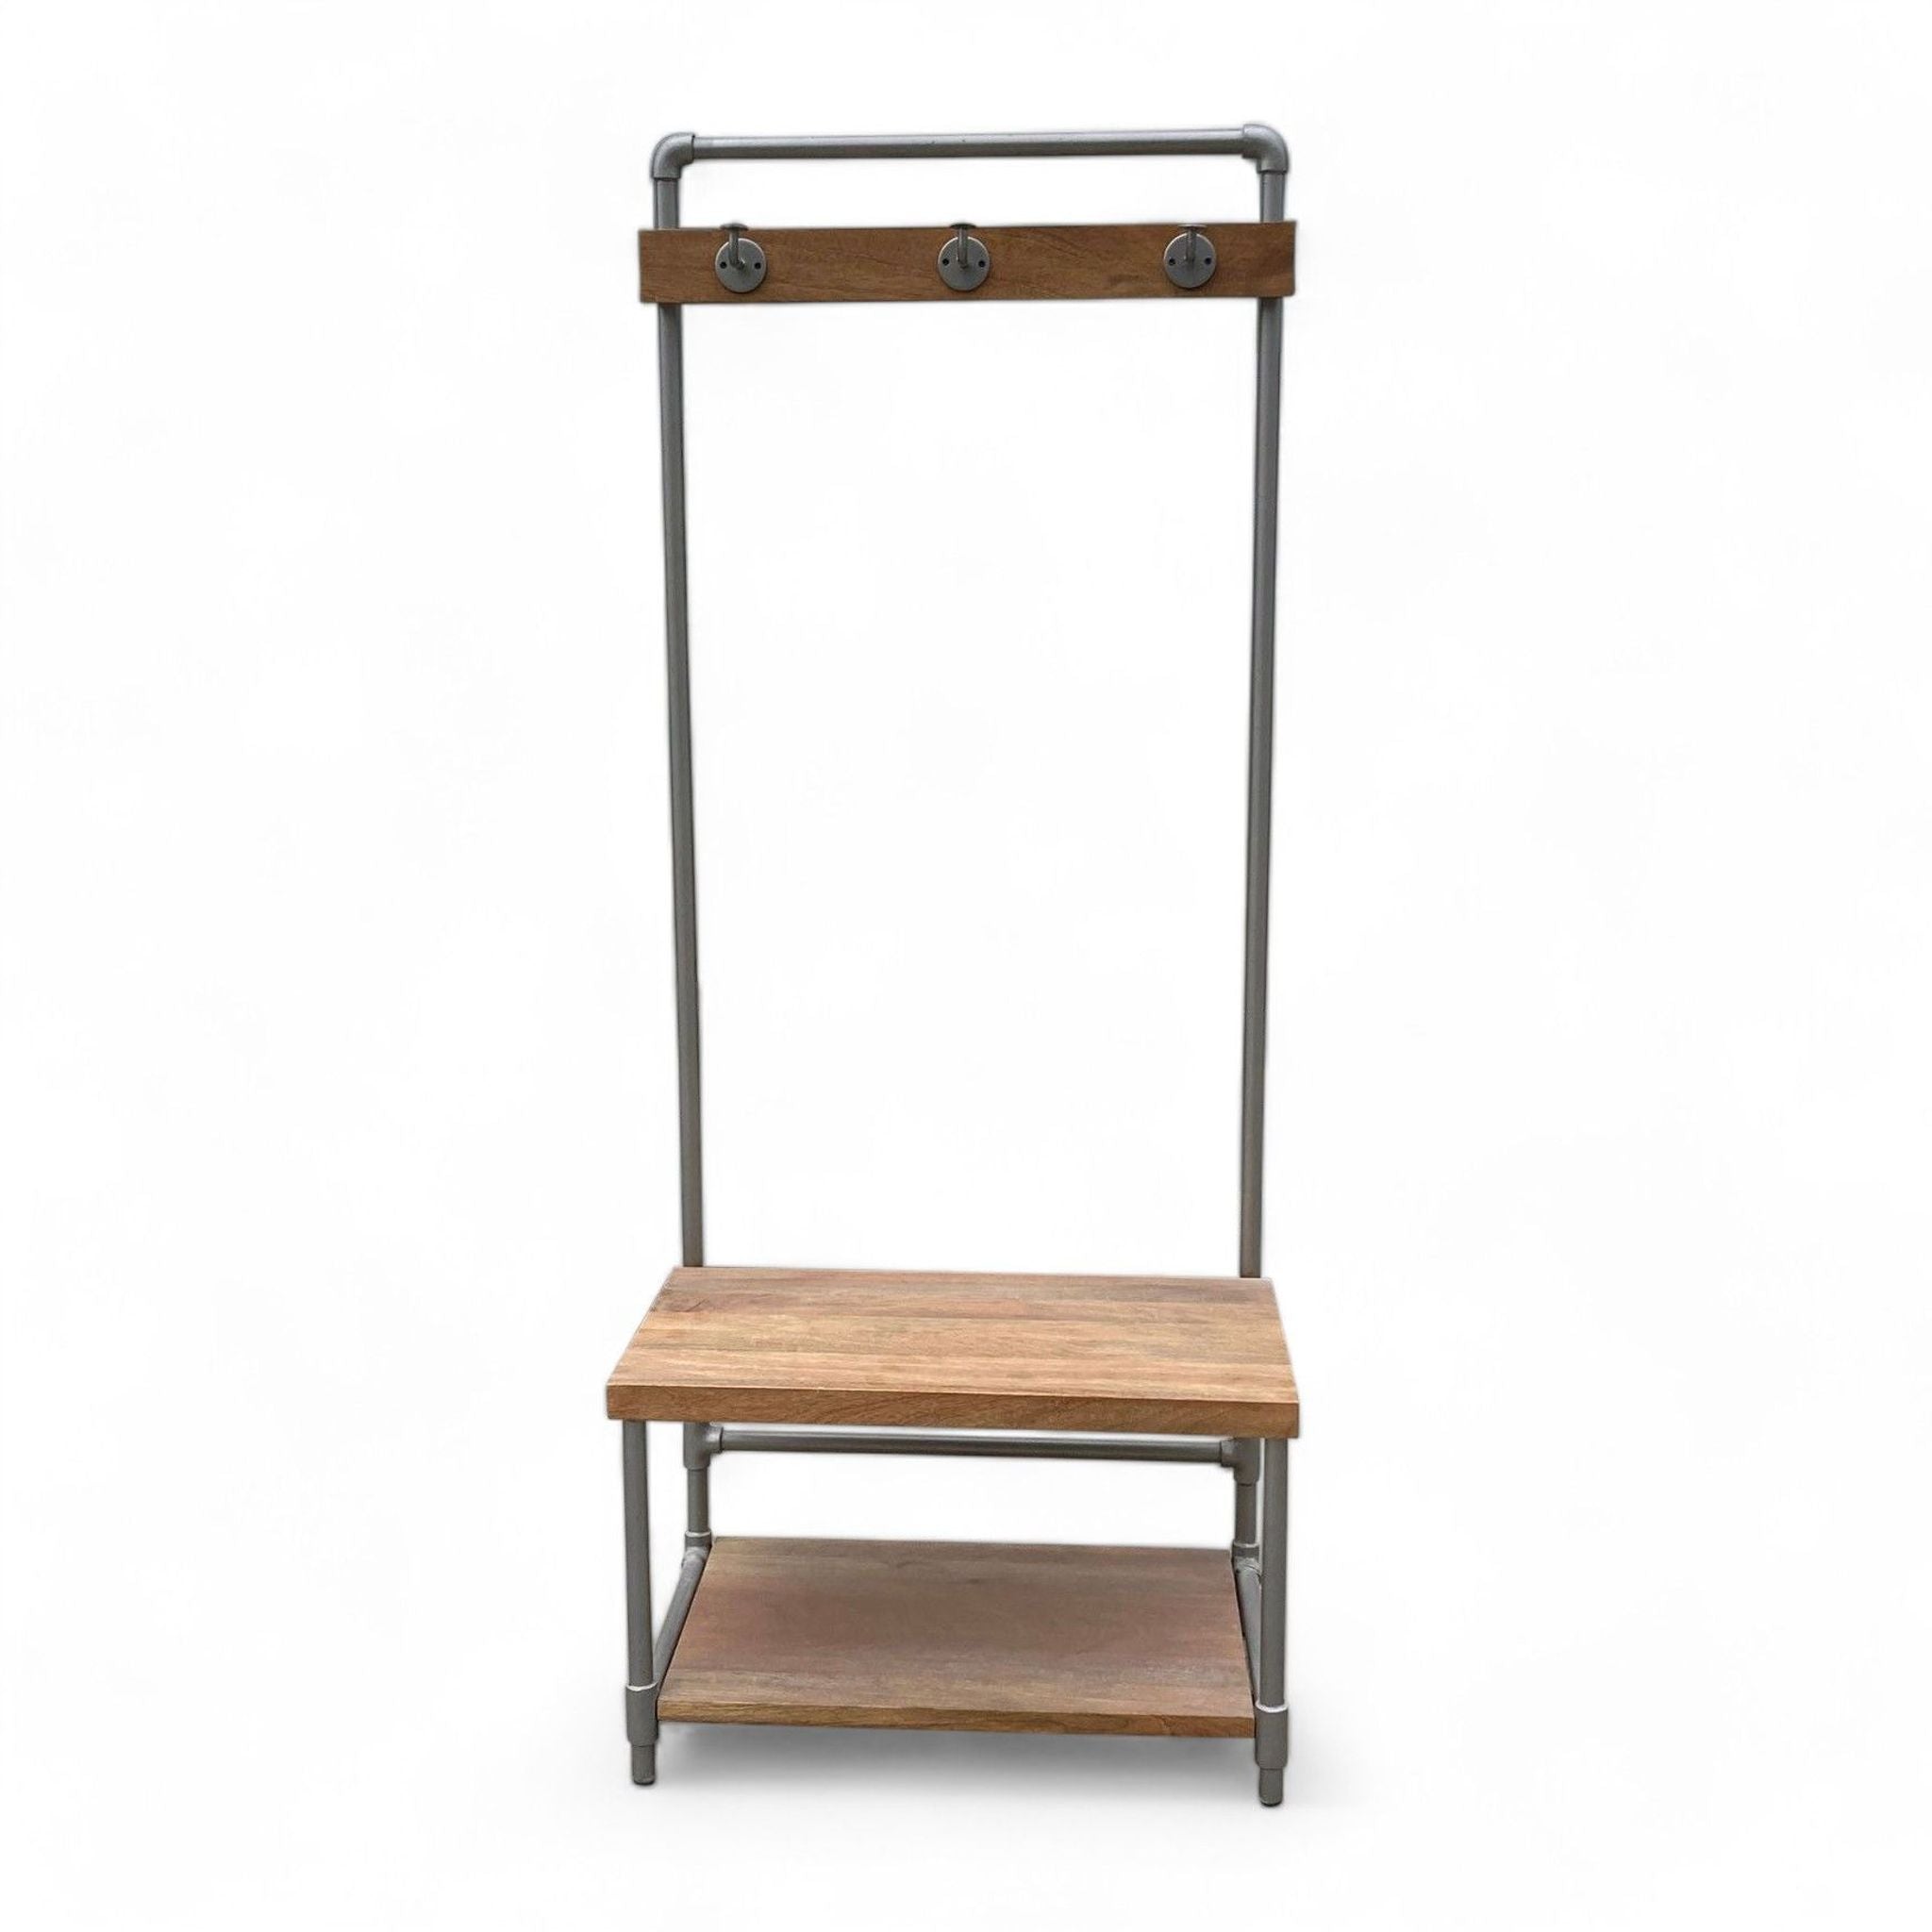 Reperch wood bench with shelf and hooks on a metal stand, isolated on a white background.